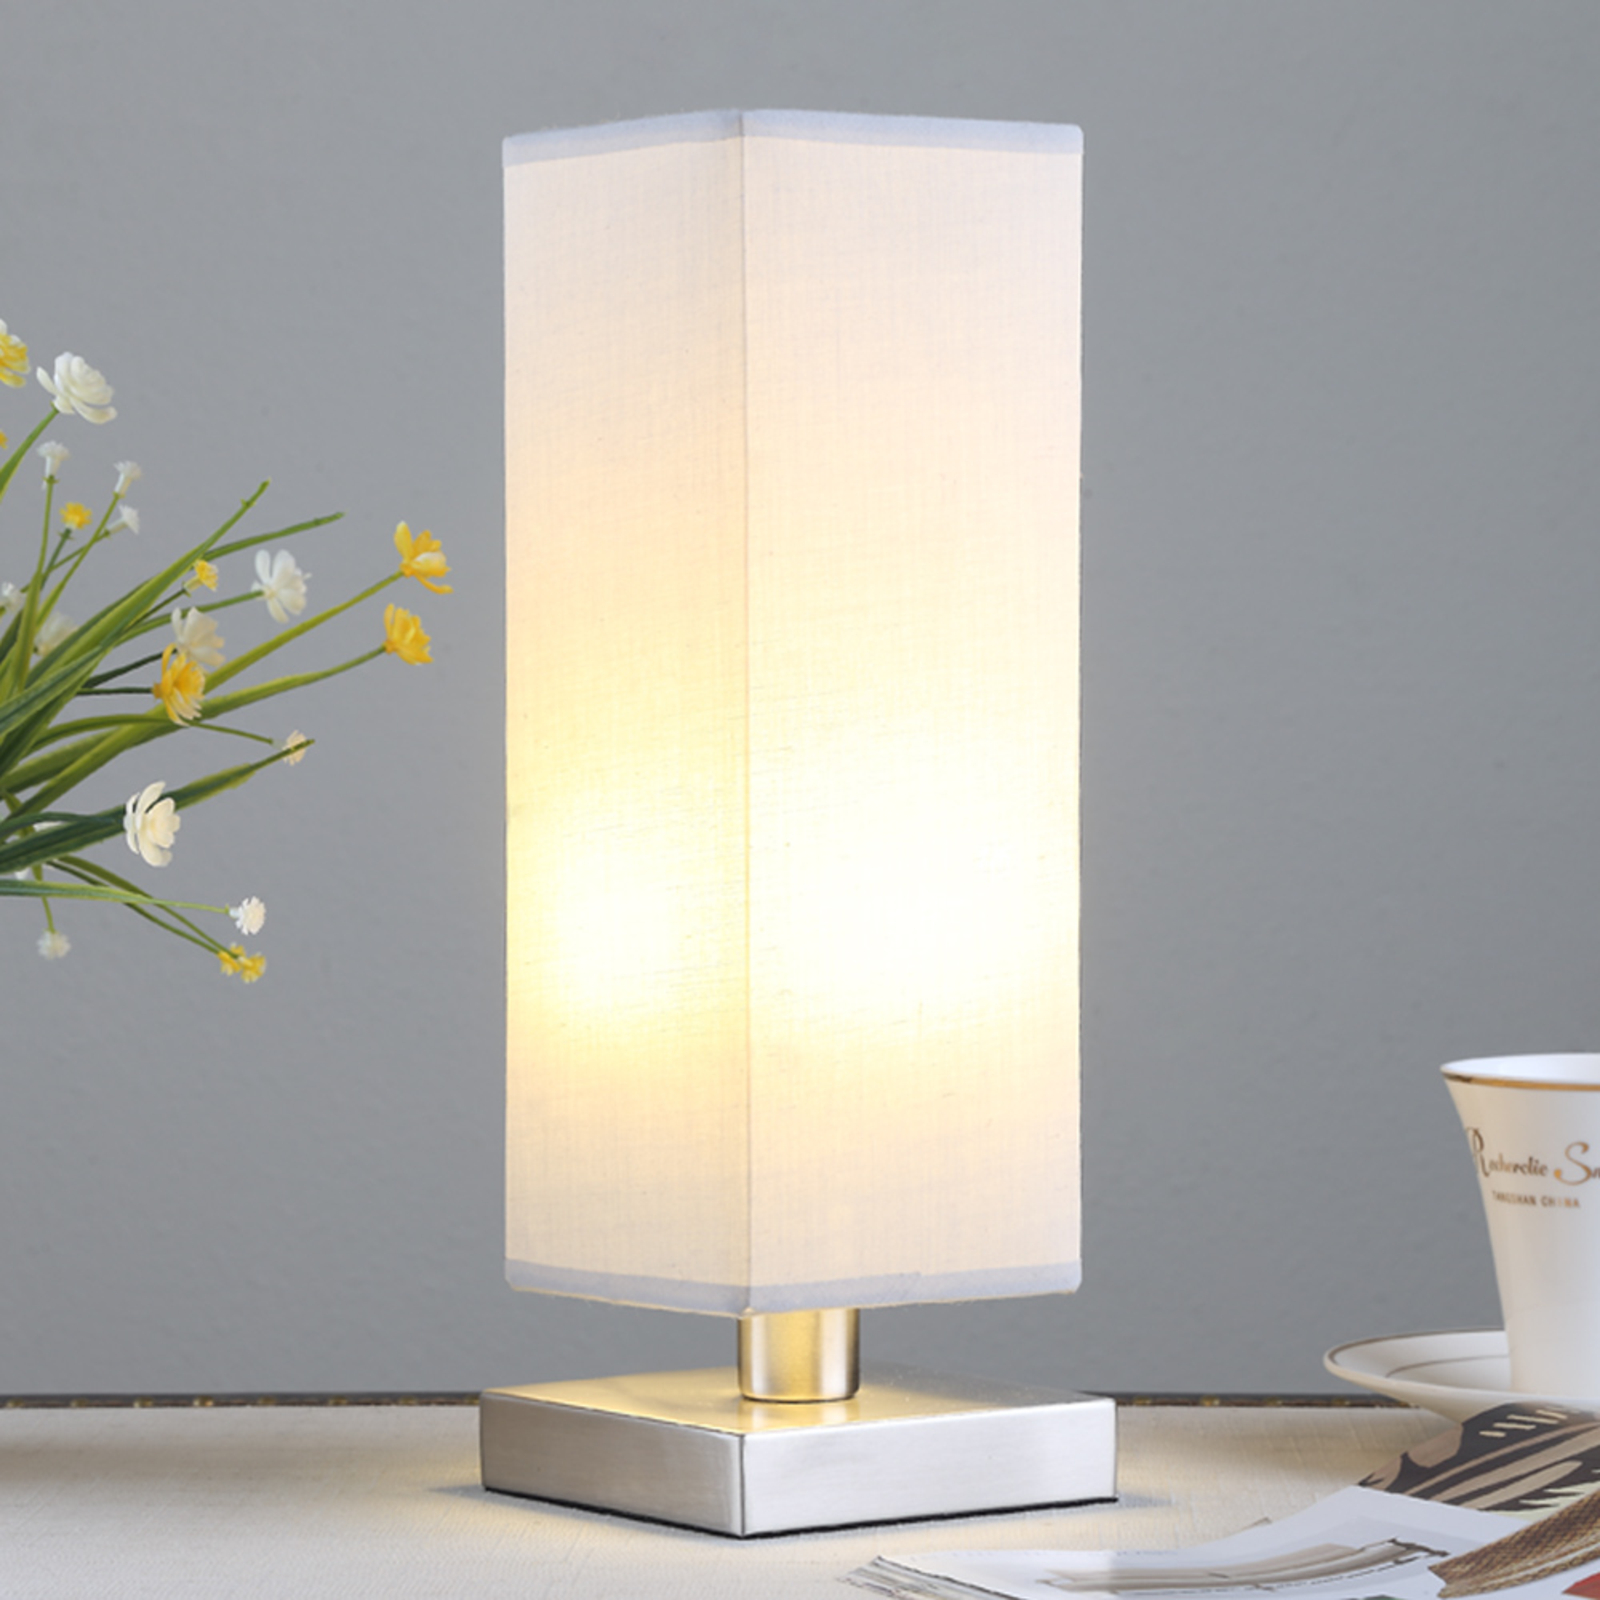 Julina - fabric bedside table lamp in light grey